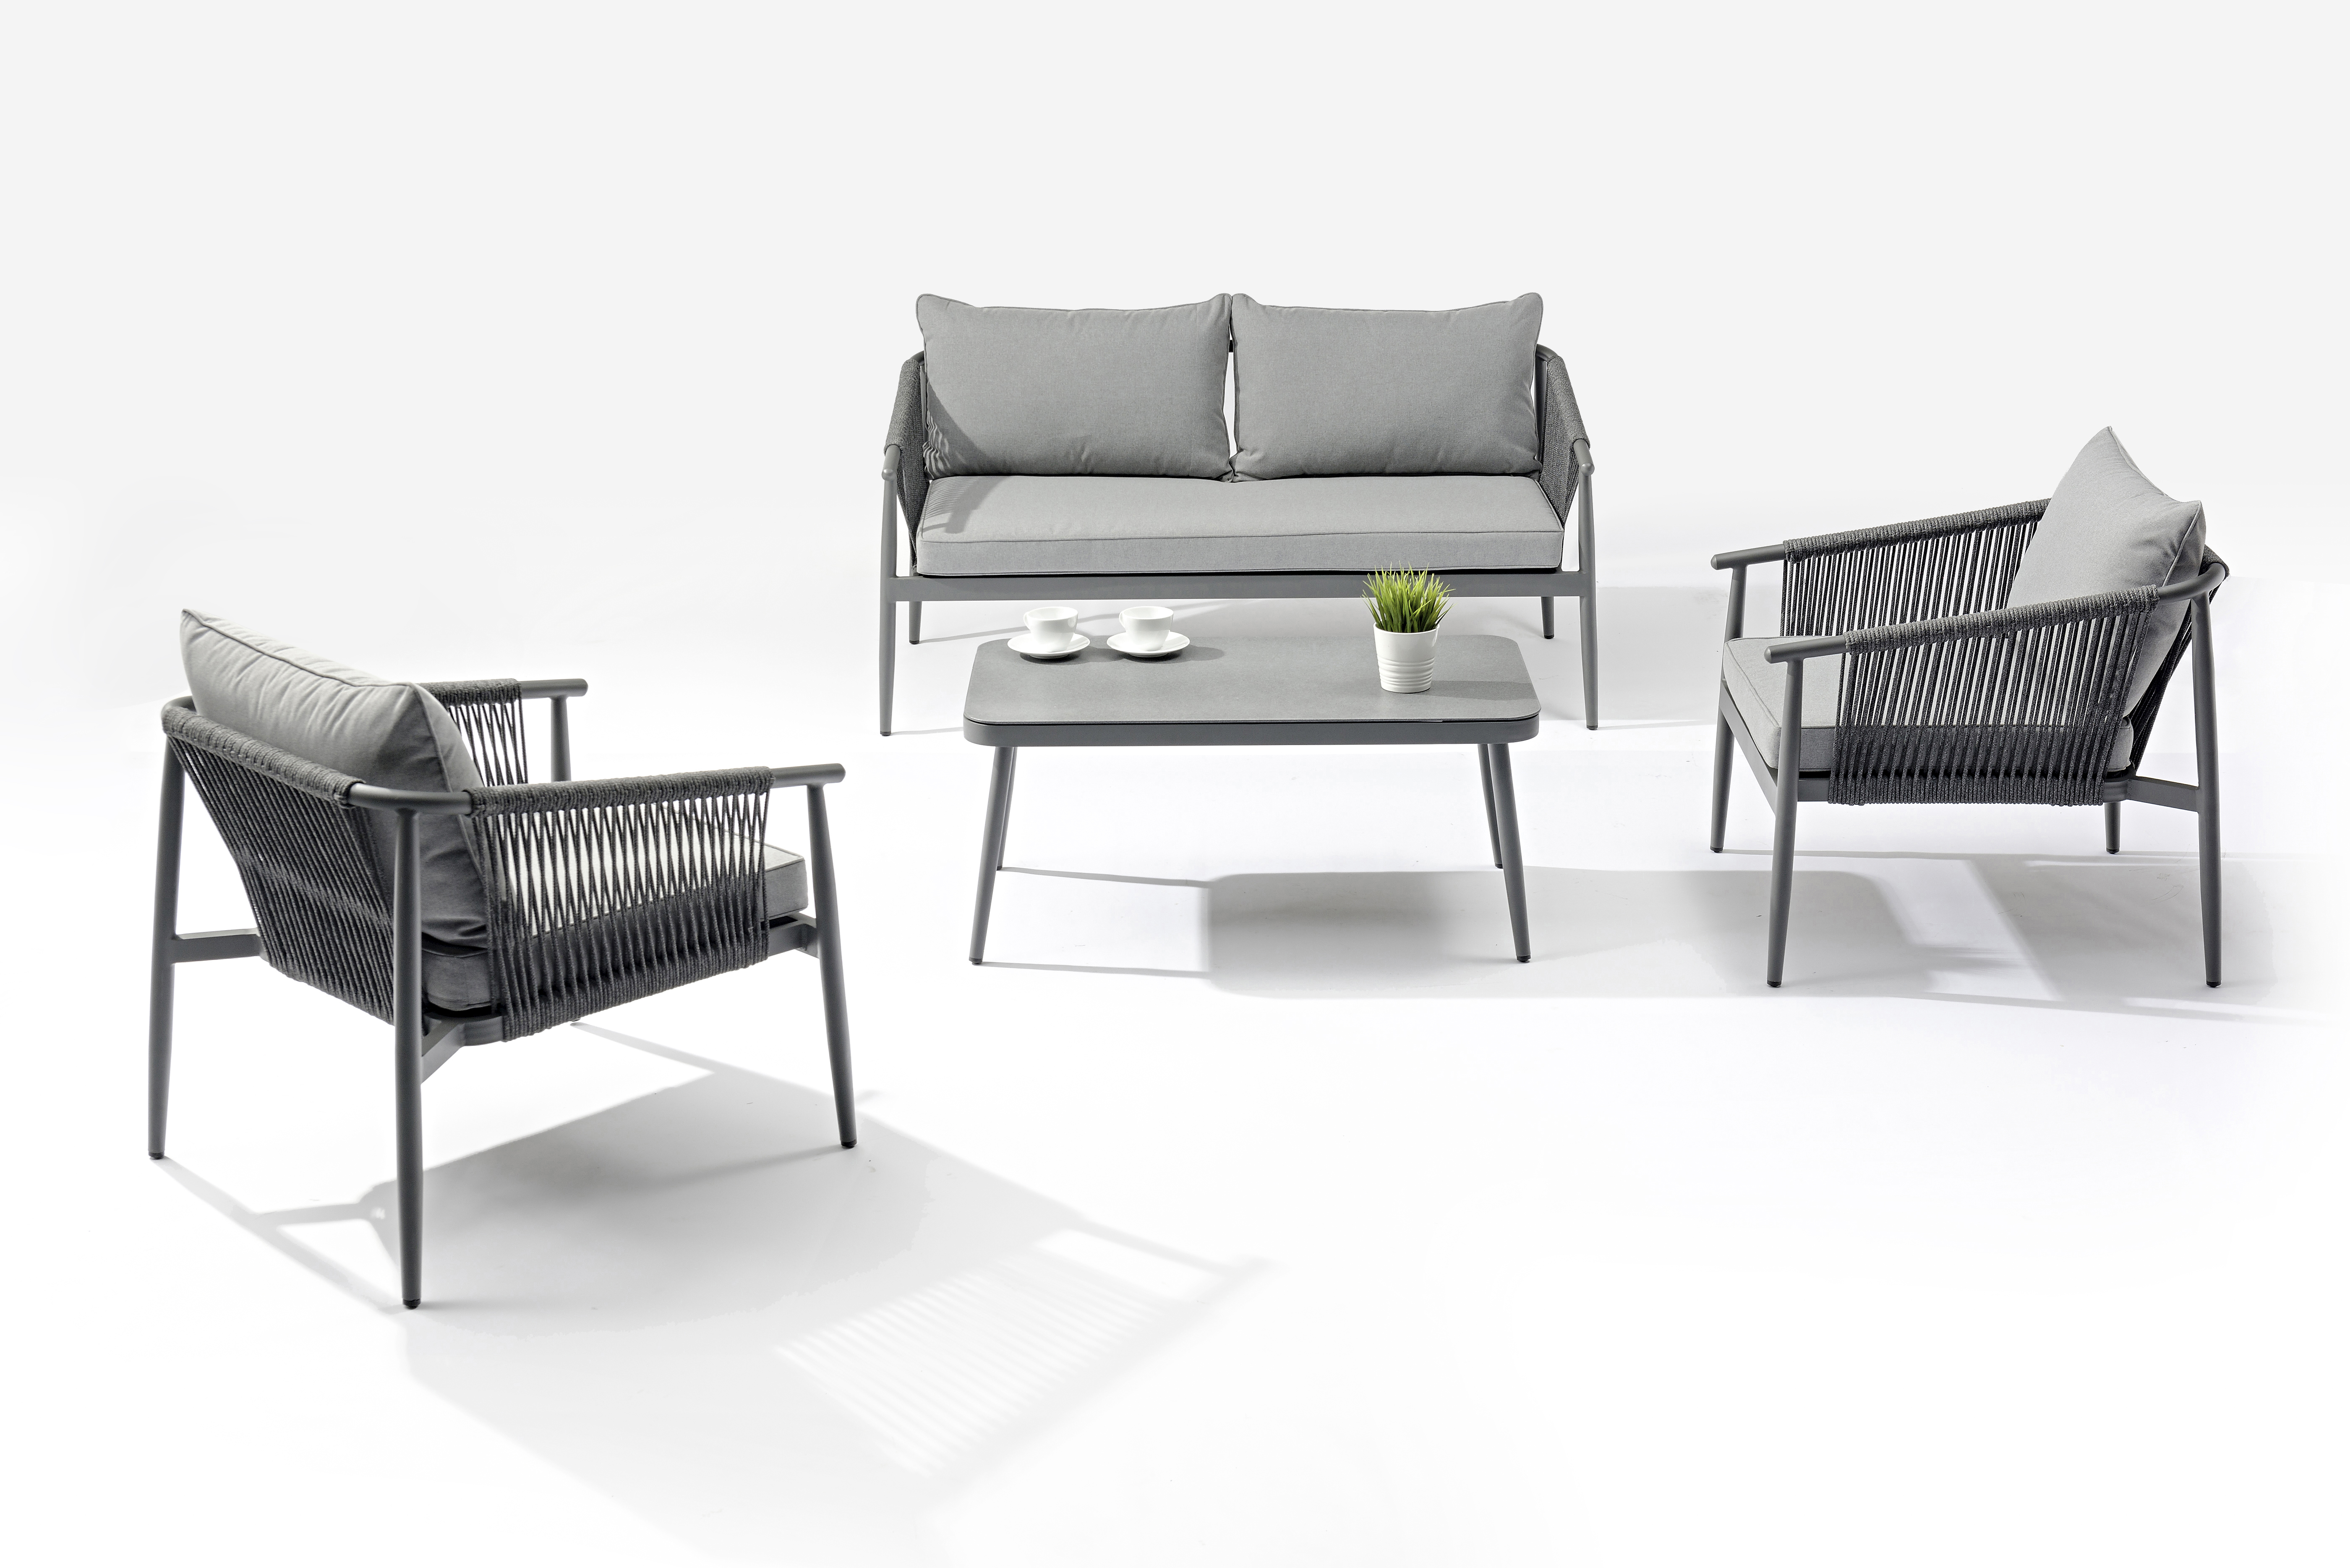 How to choose outdoor furniture?